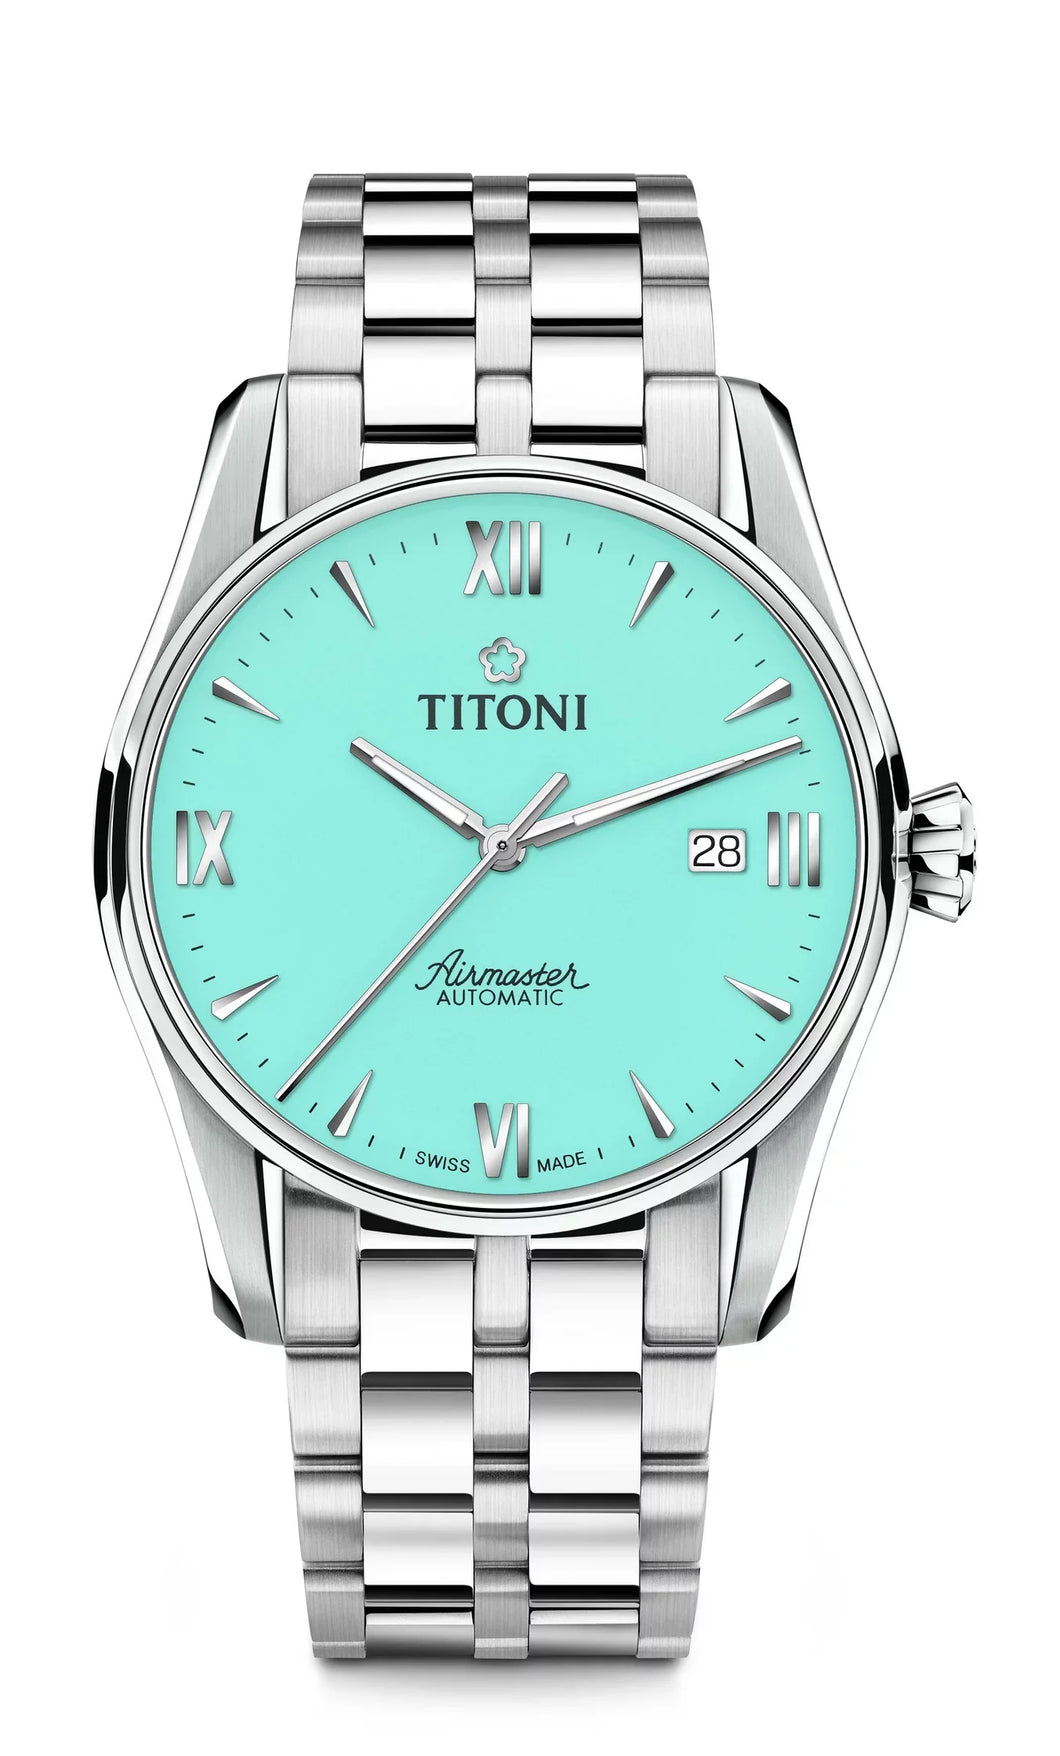 TITONI Airmaster Automatic Gents Watch 83908 S-691